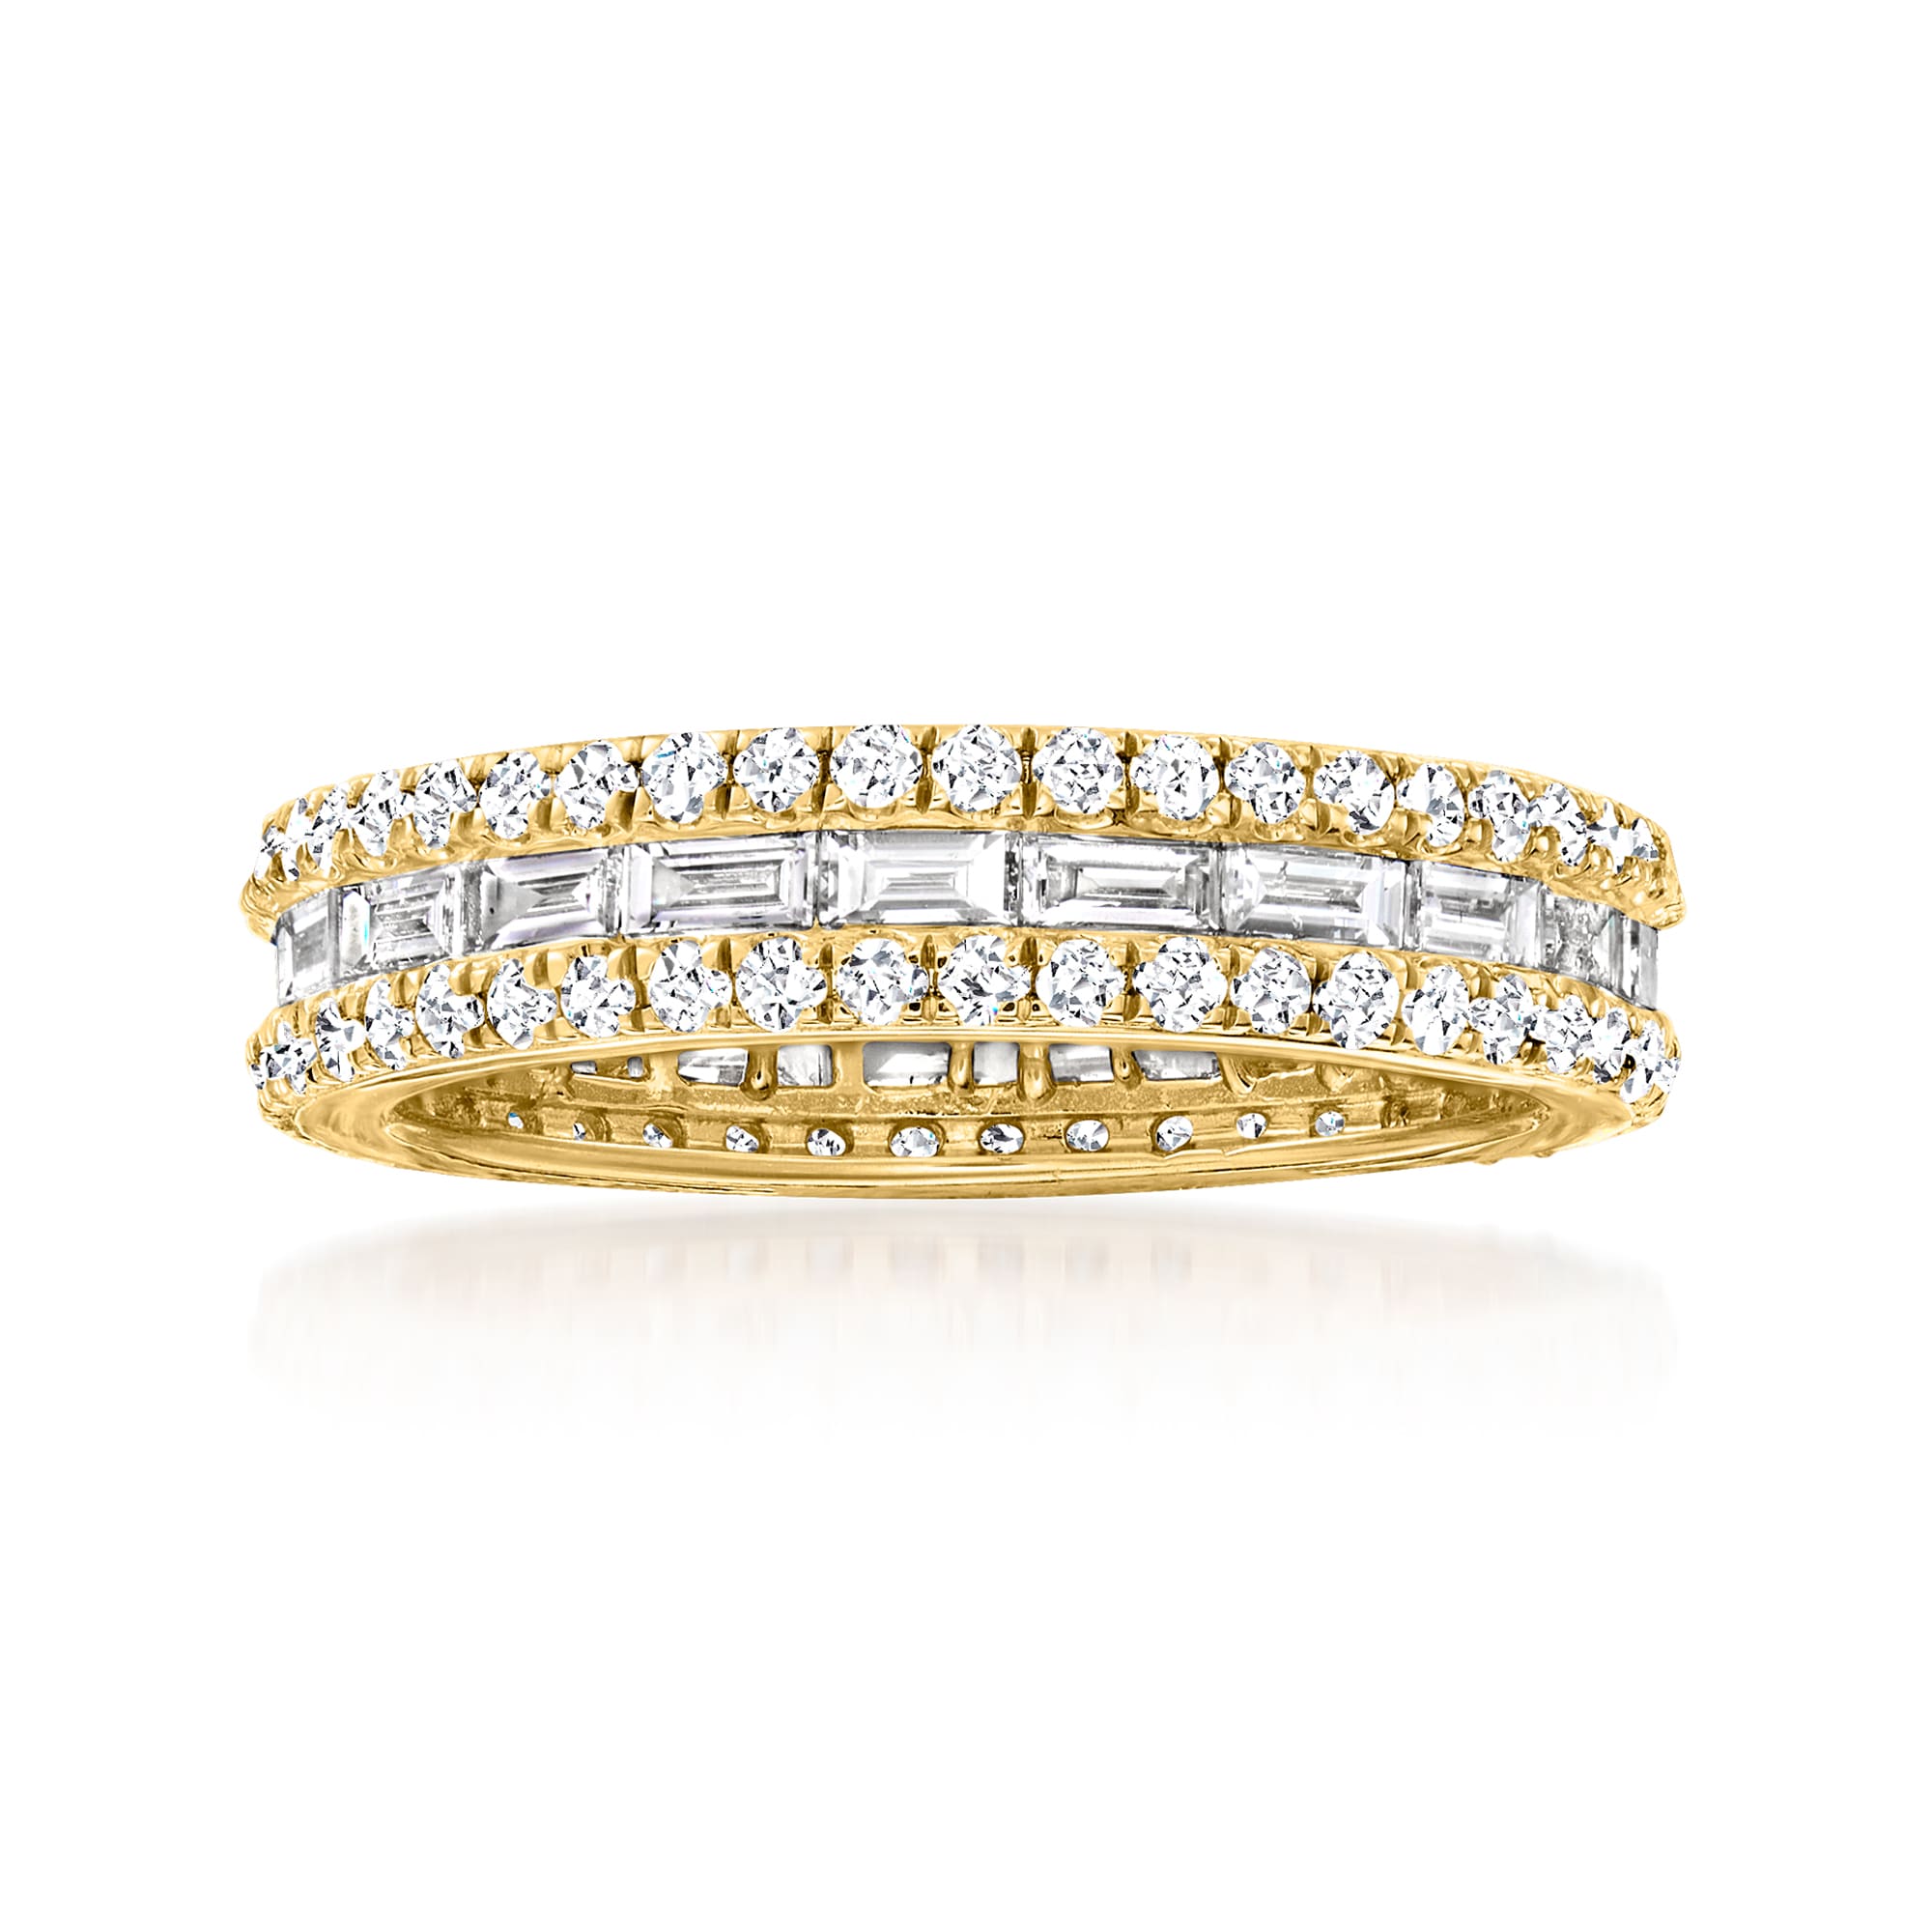 1.75 ct. t.w. Diamond Eternity Band in 14kt Yellow Gold | Ross-Simons